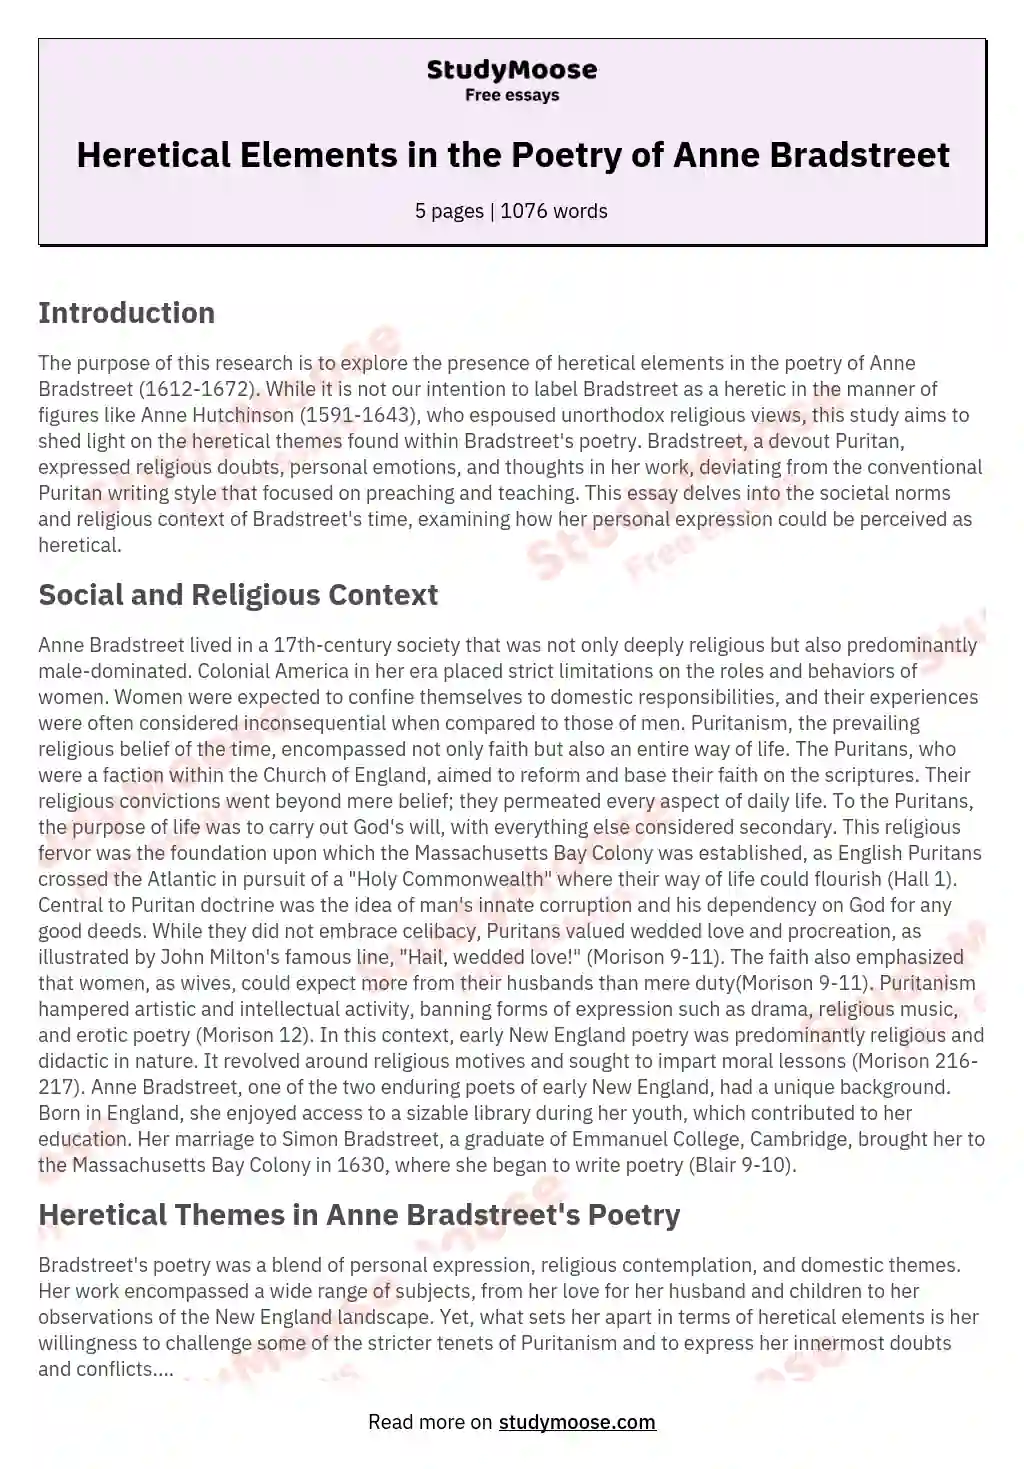 Heretical Elements in the Poetry of Anne Bradstreet essay